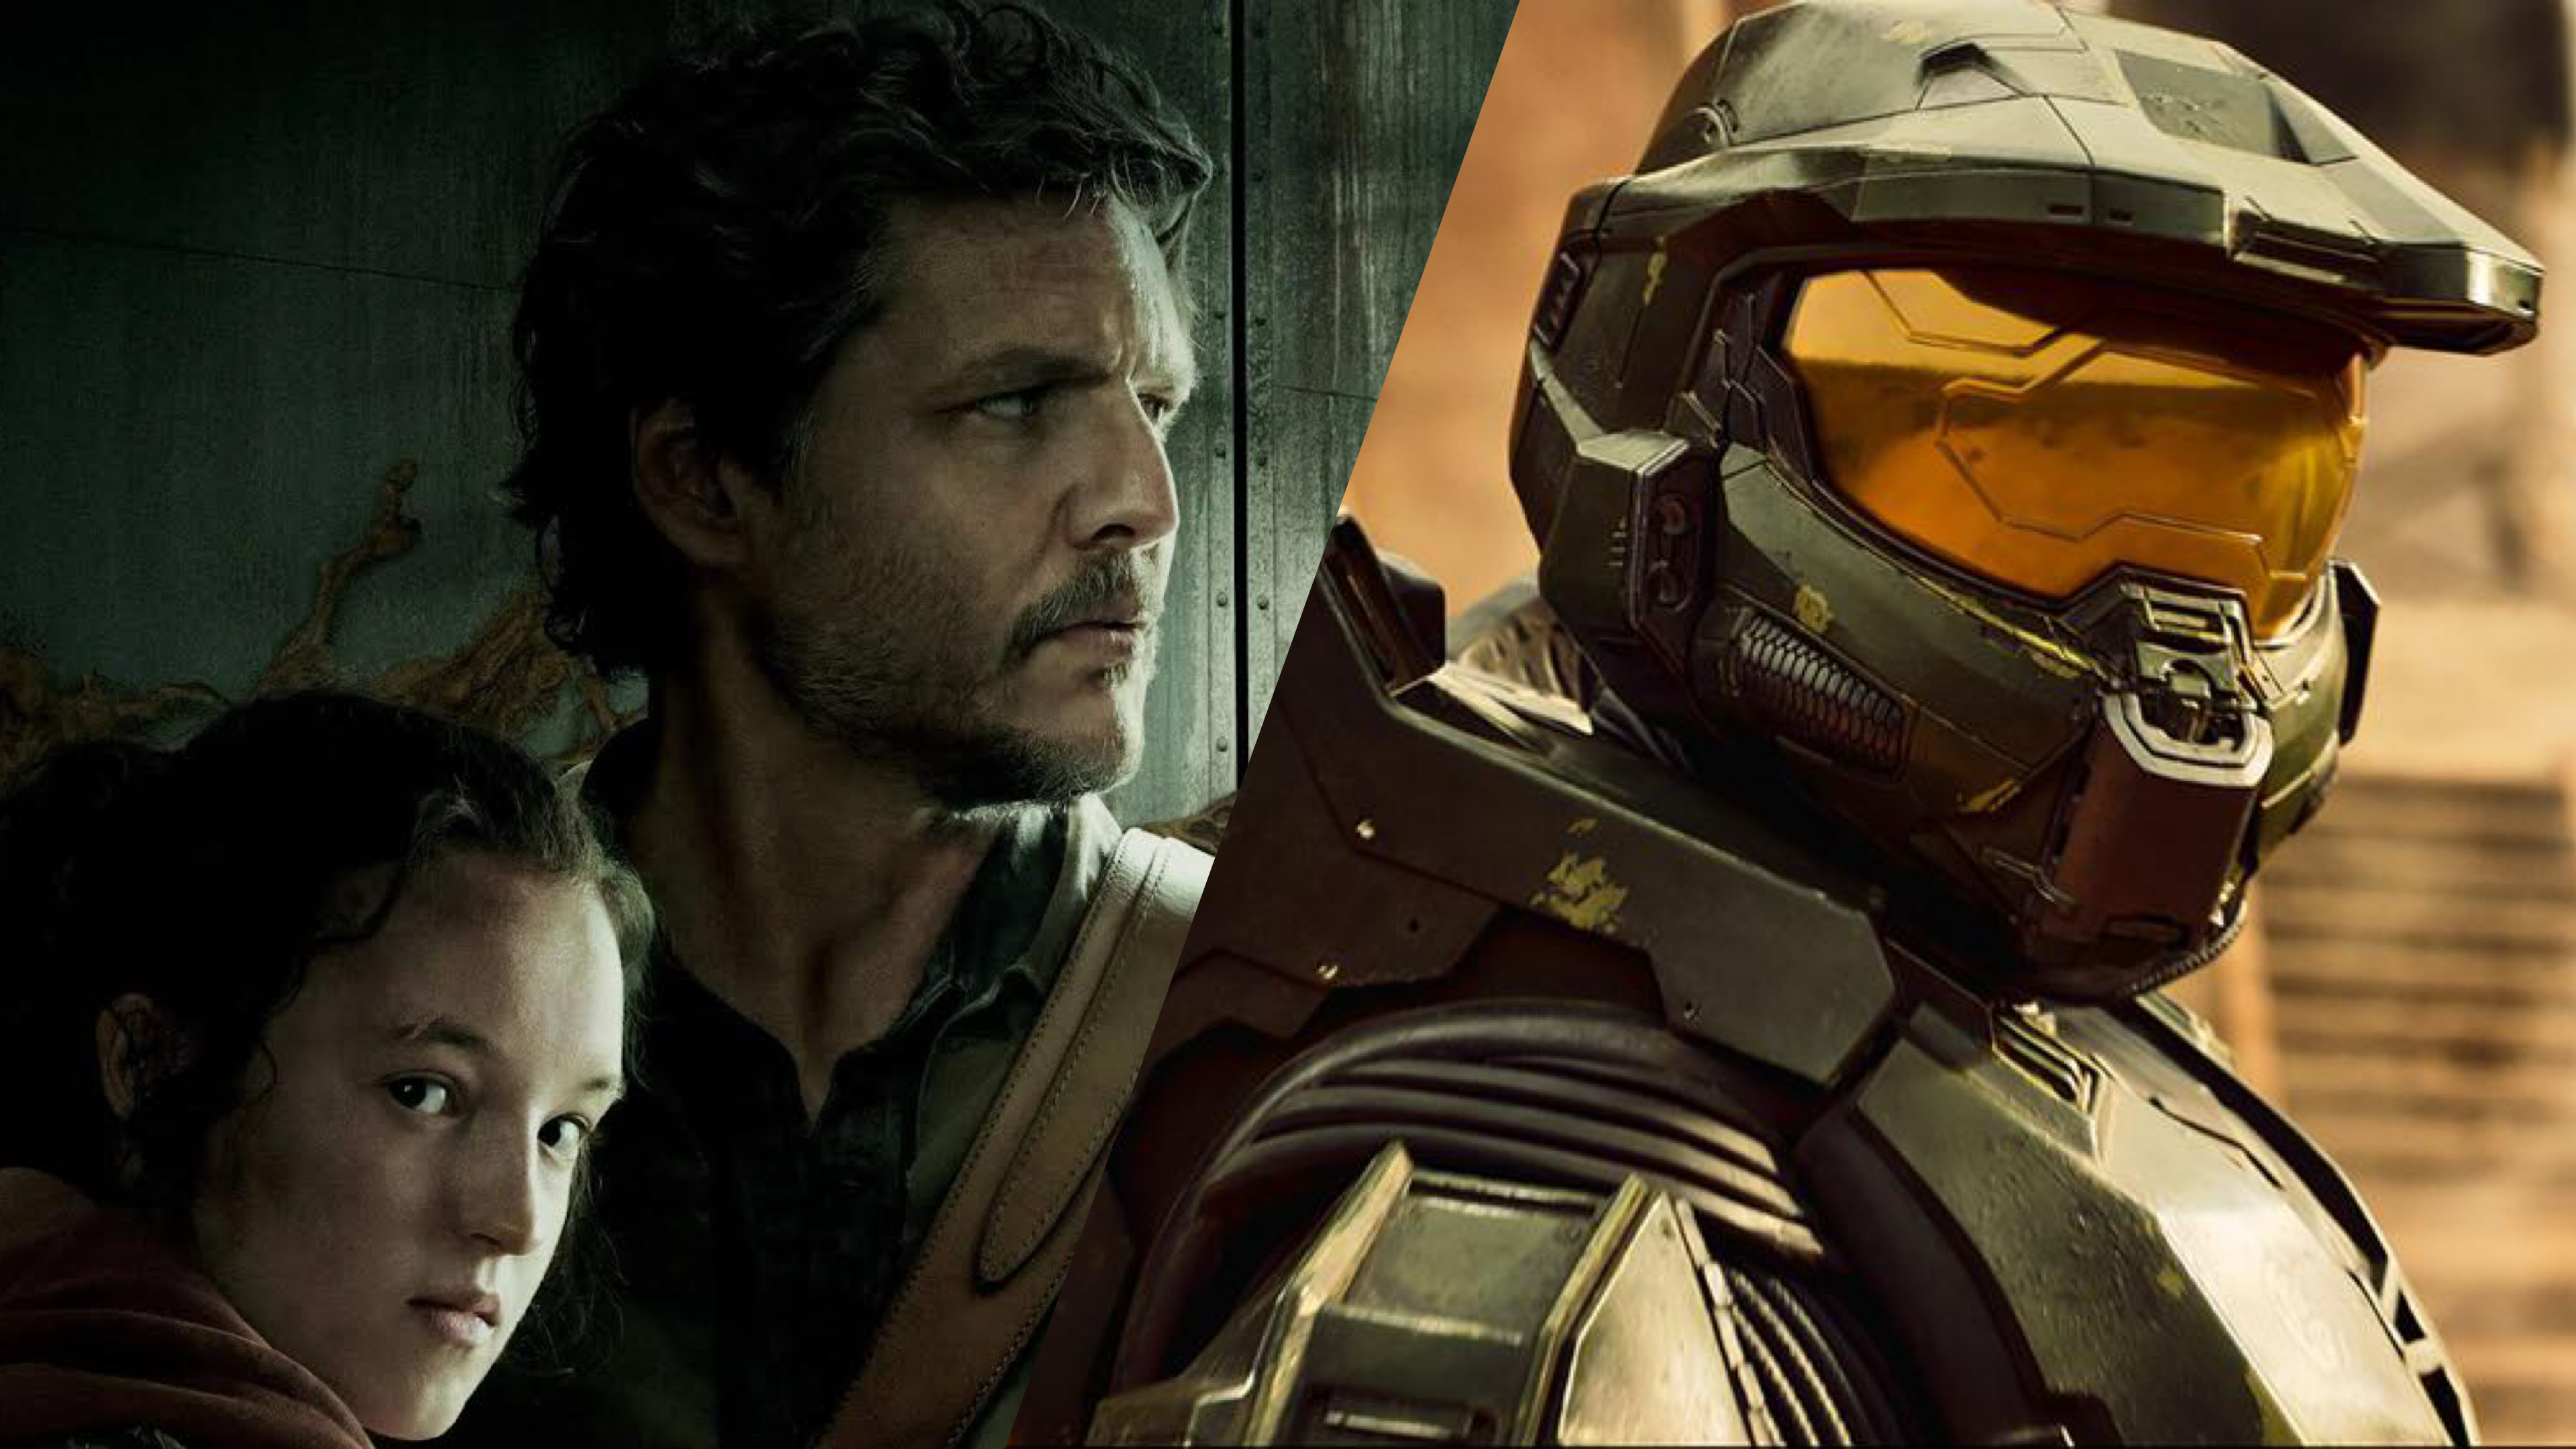 The Biggest Concerns Fans Have About The Upcoming Halo TV Series